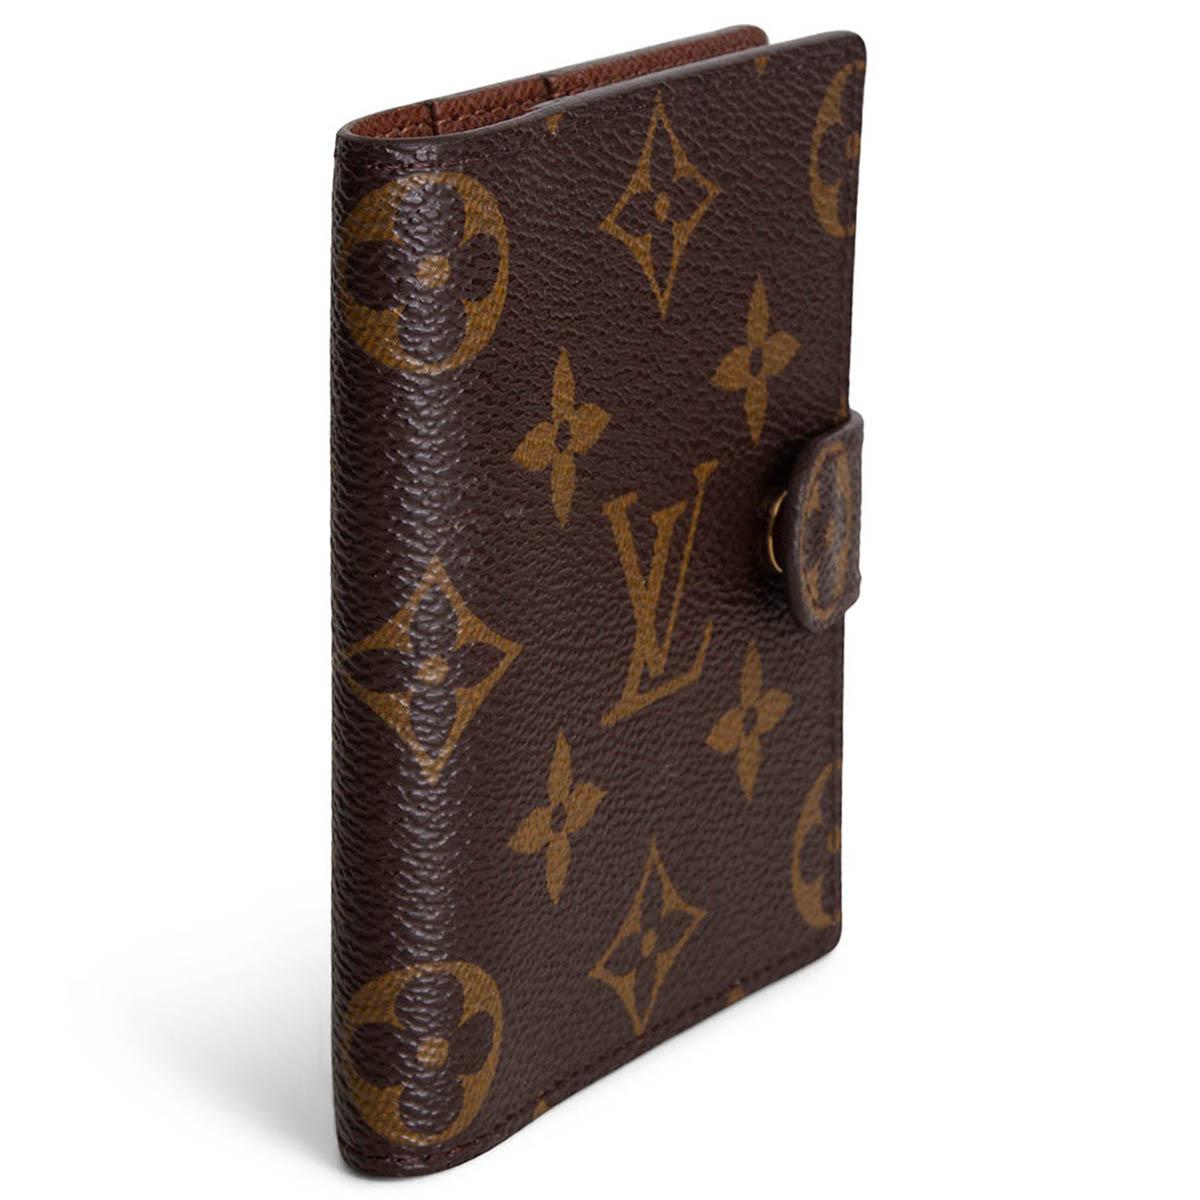 100% authentic Louis Vuitton Monogram Canvas card wallet. Opens with a snap button and is lined in brown coated canvas with 3 slip pockets. Has been carried and is in excellent condition. 

Measurements
Width	9cm (3.5in)
Height	10.5cm